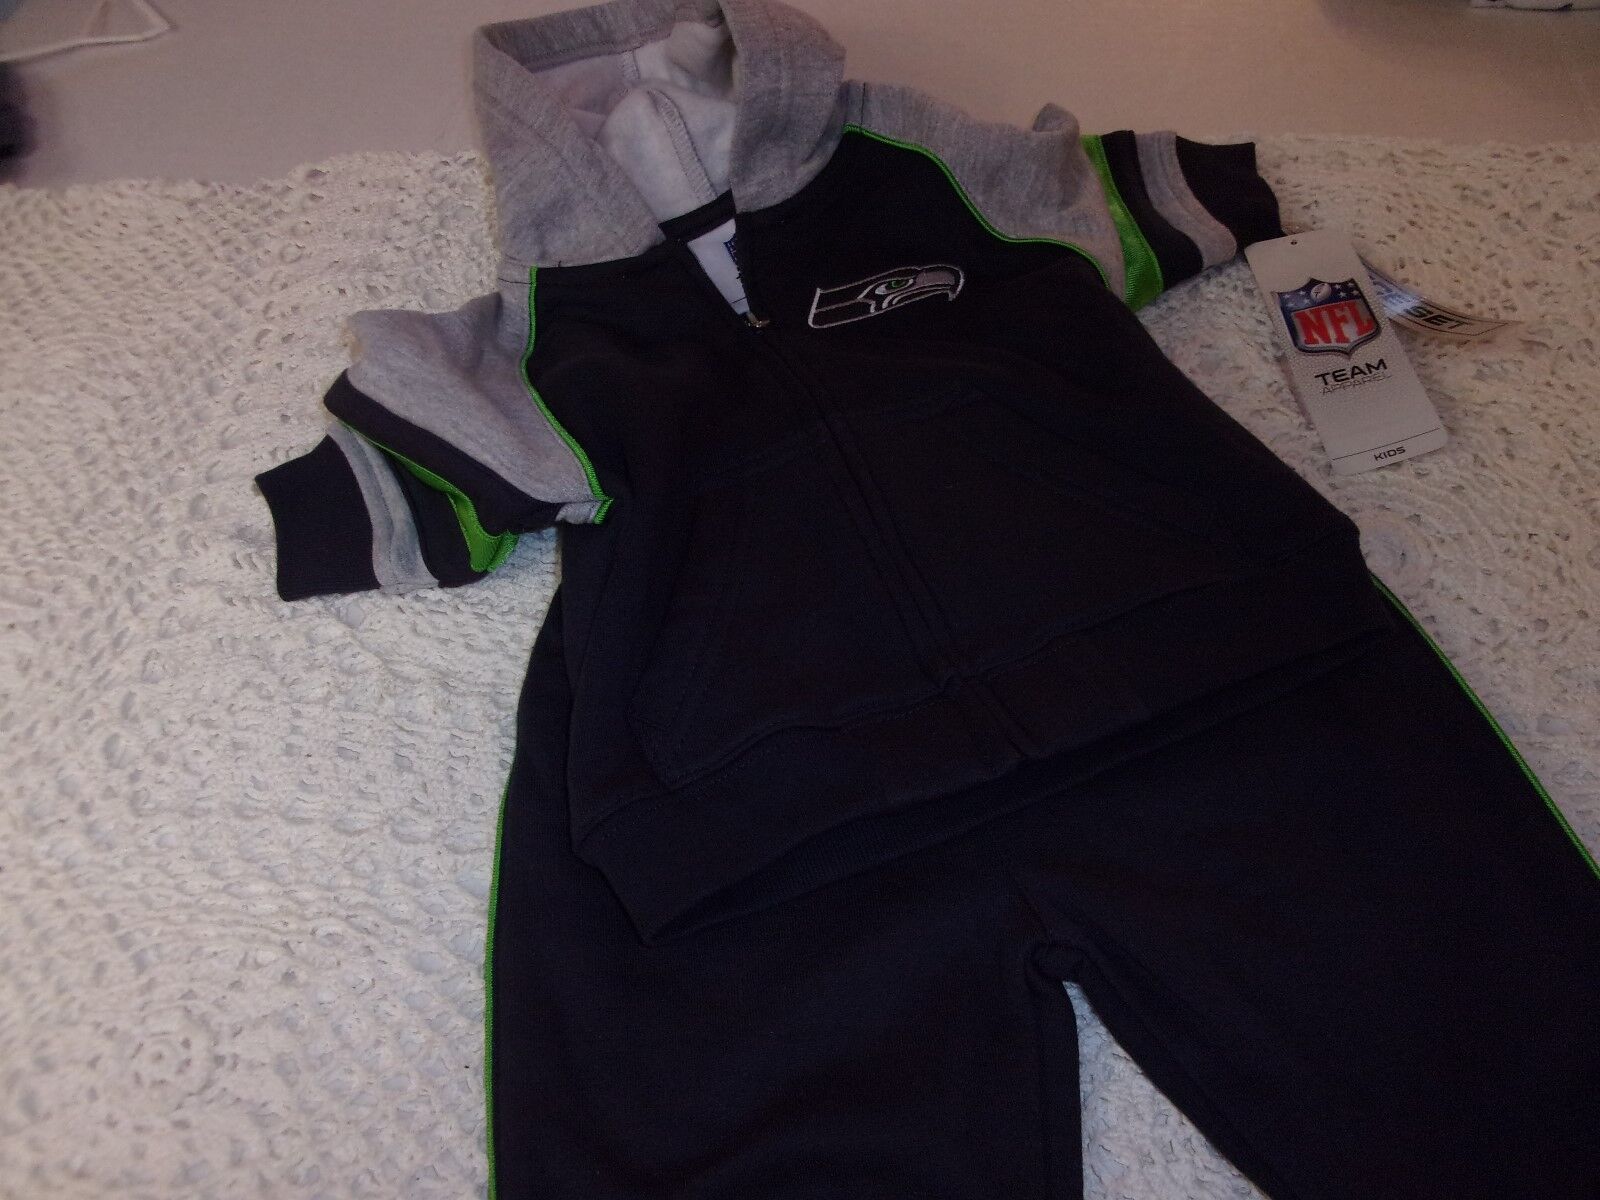 Seattle SEAHAWKS Infant Jogging Athletic 2 pc Outfit 0-3 6-9 mo baby NFL jacket